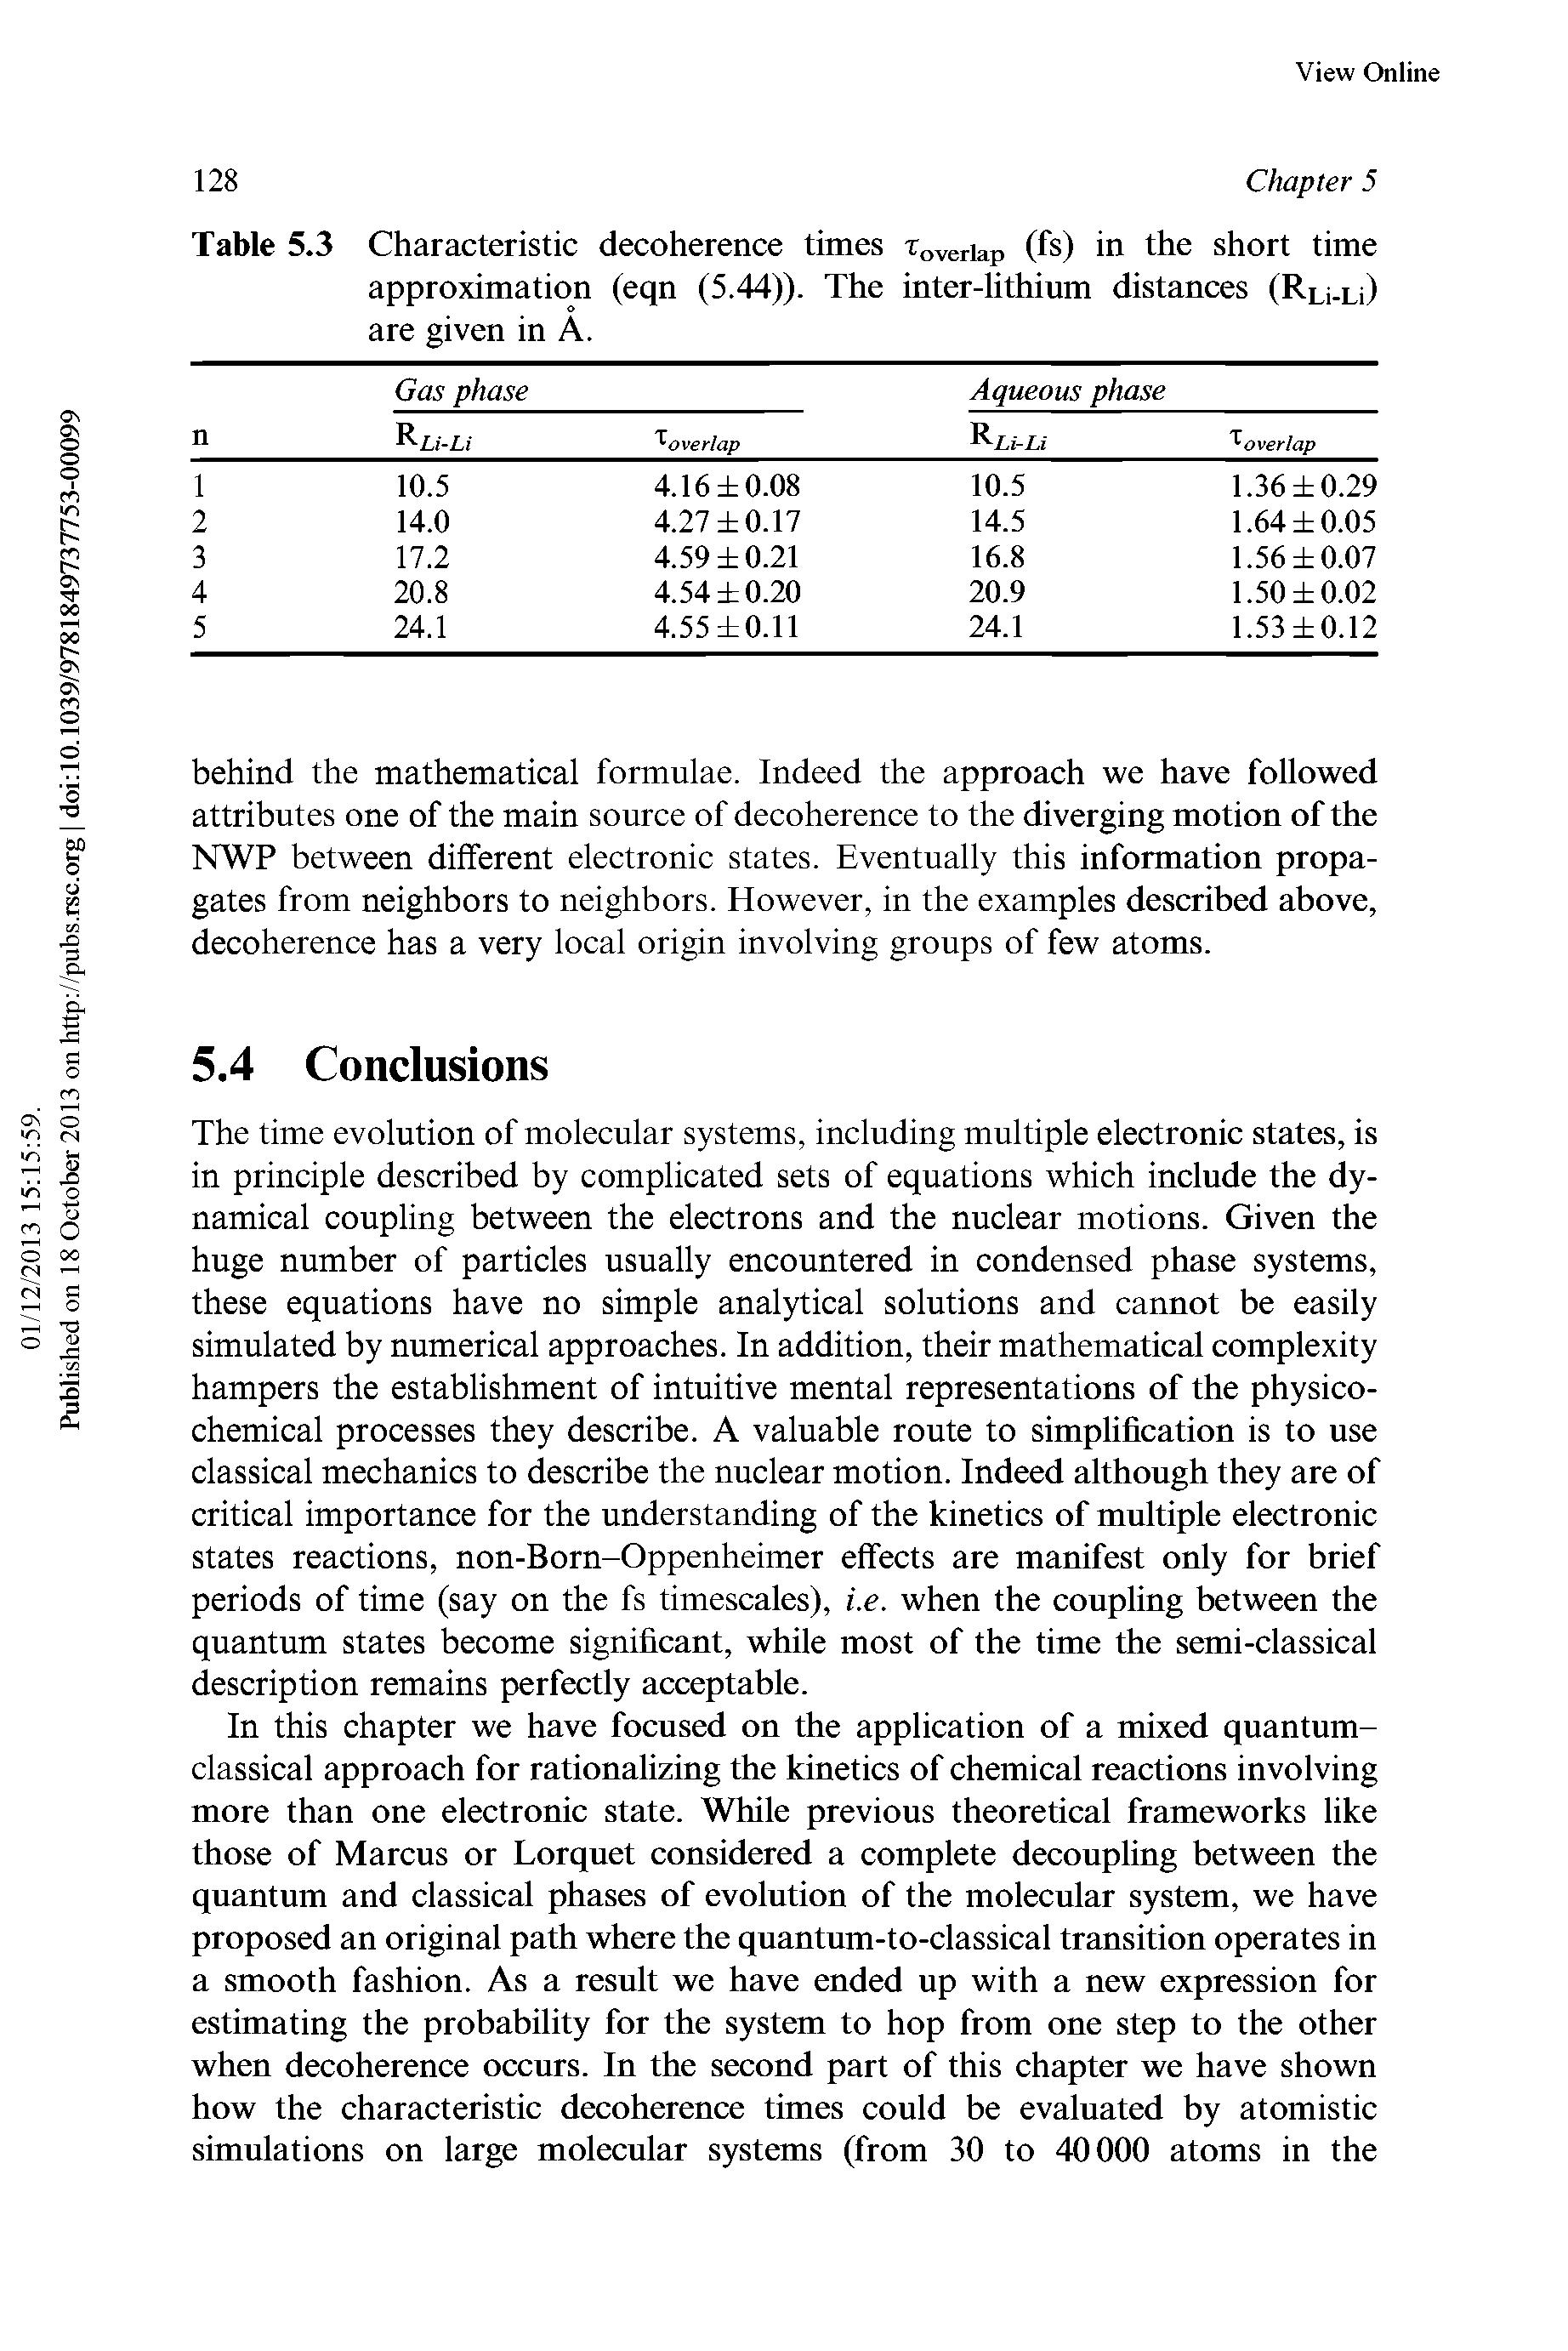 Table 5.3 Characteristic decoherence times Toveriap (fs) in the short time approximation (eqn (5.44)). The inter-Kthium distances (Ru-Li) are given in A.